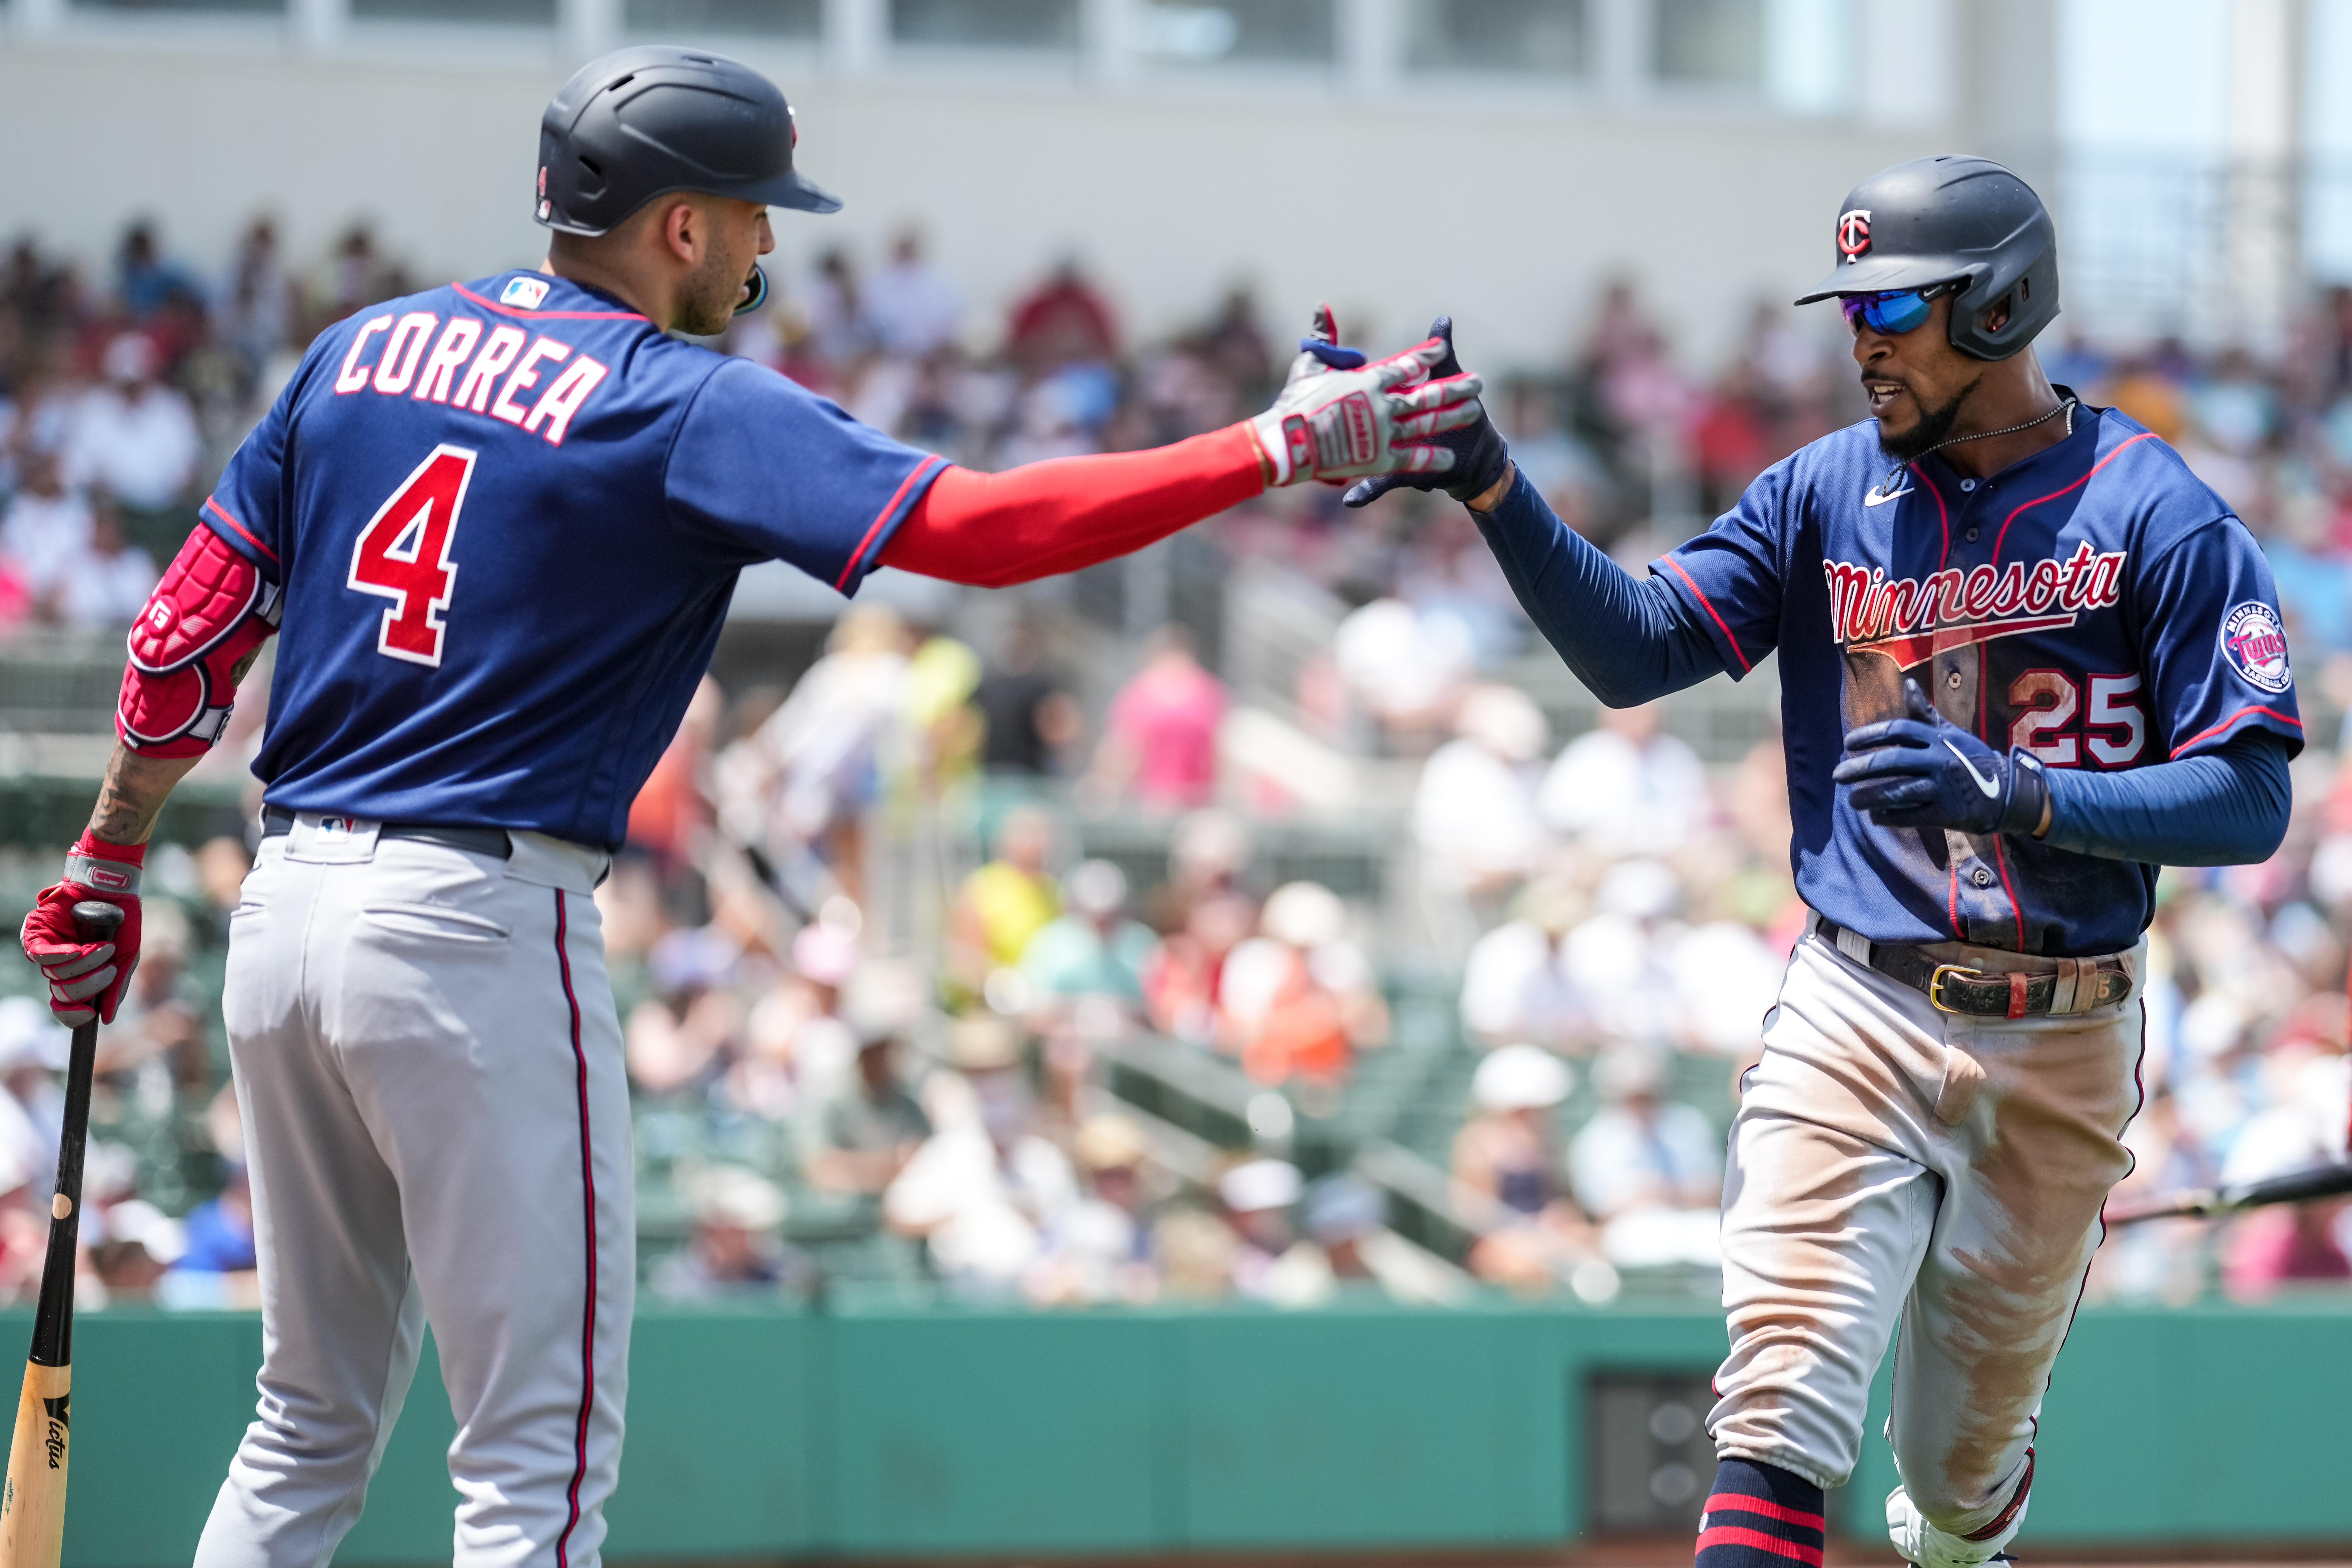 The Minnesota Twins are opening a gap in the AL Central. Can they finally  end their postseason skid? - The San Diego Union-Tribune